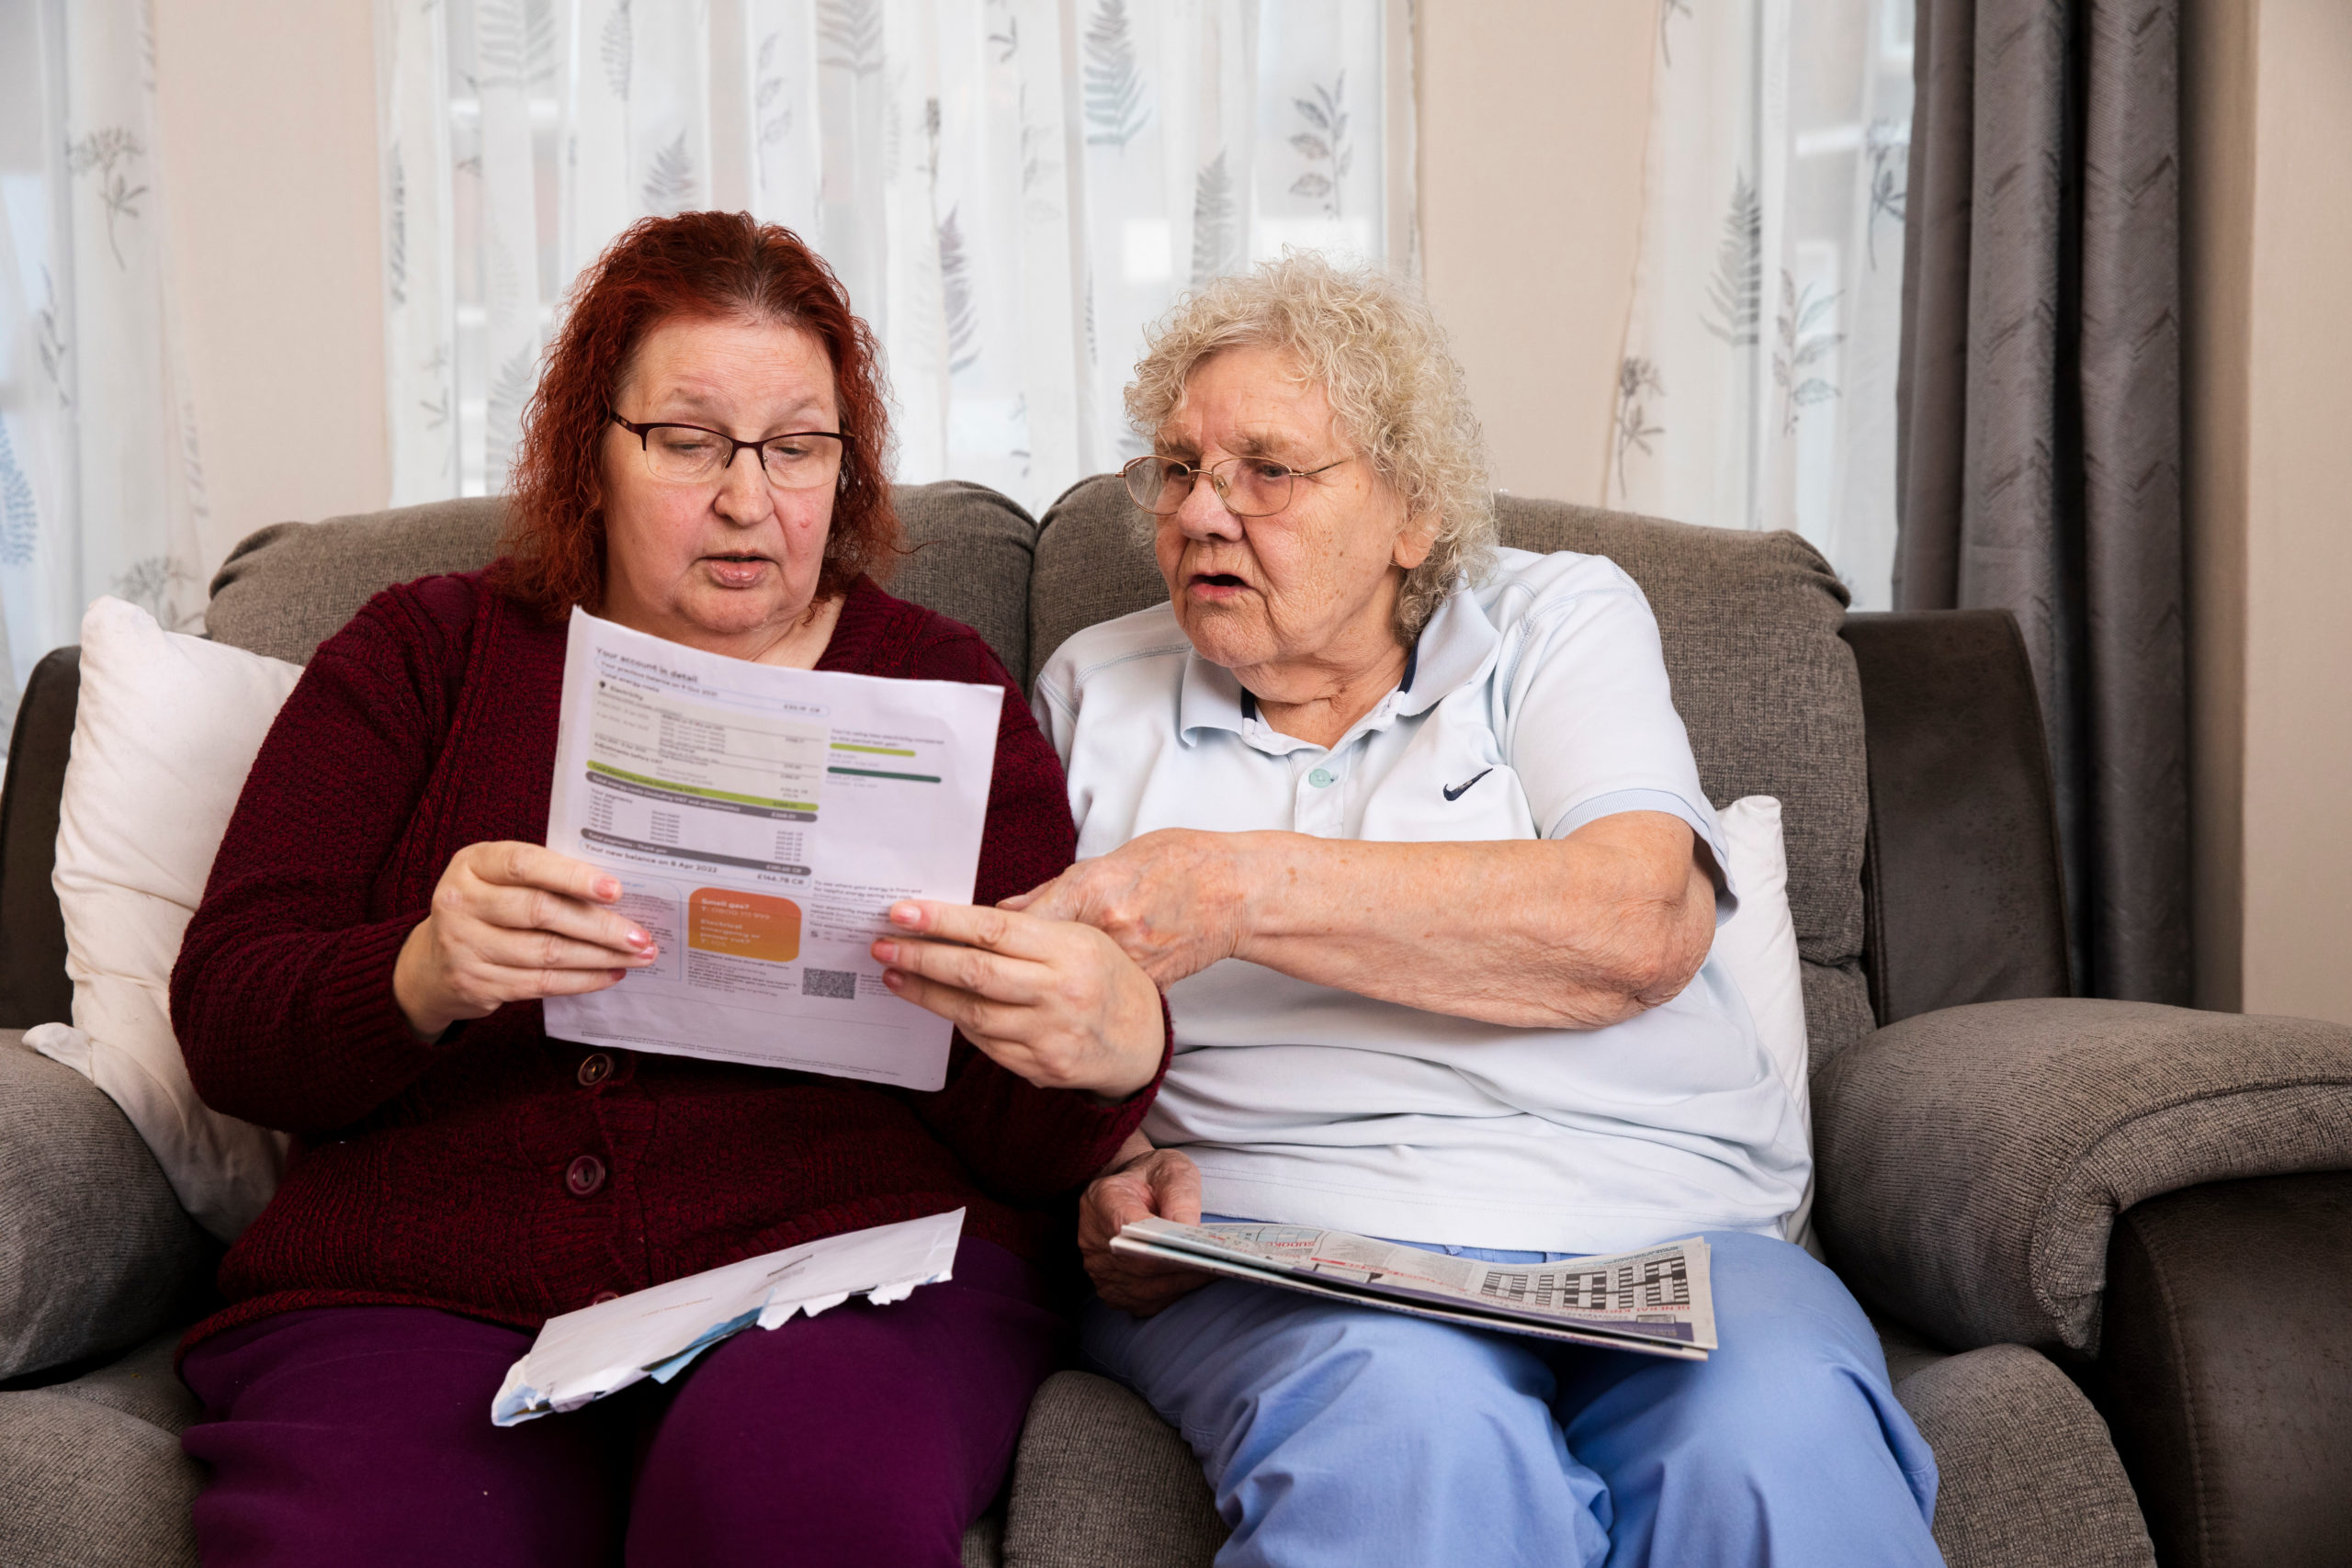 Two women sitting on a sofa, looking at an energy bill